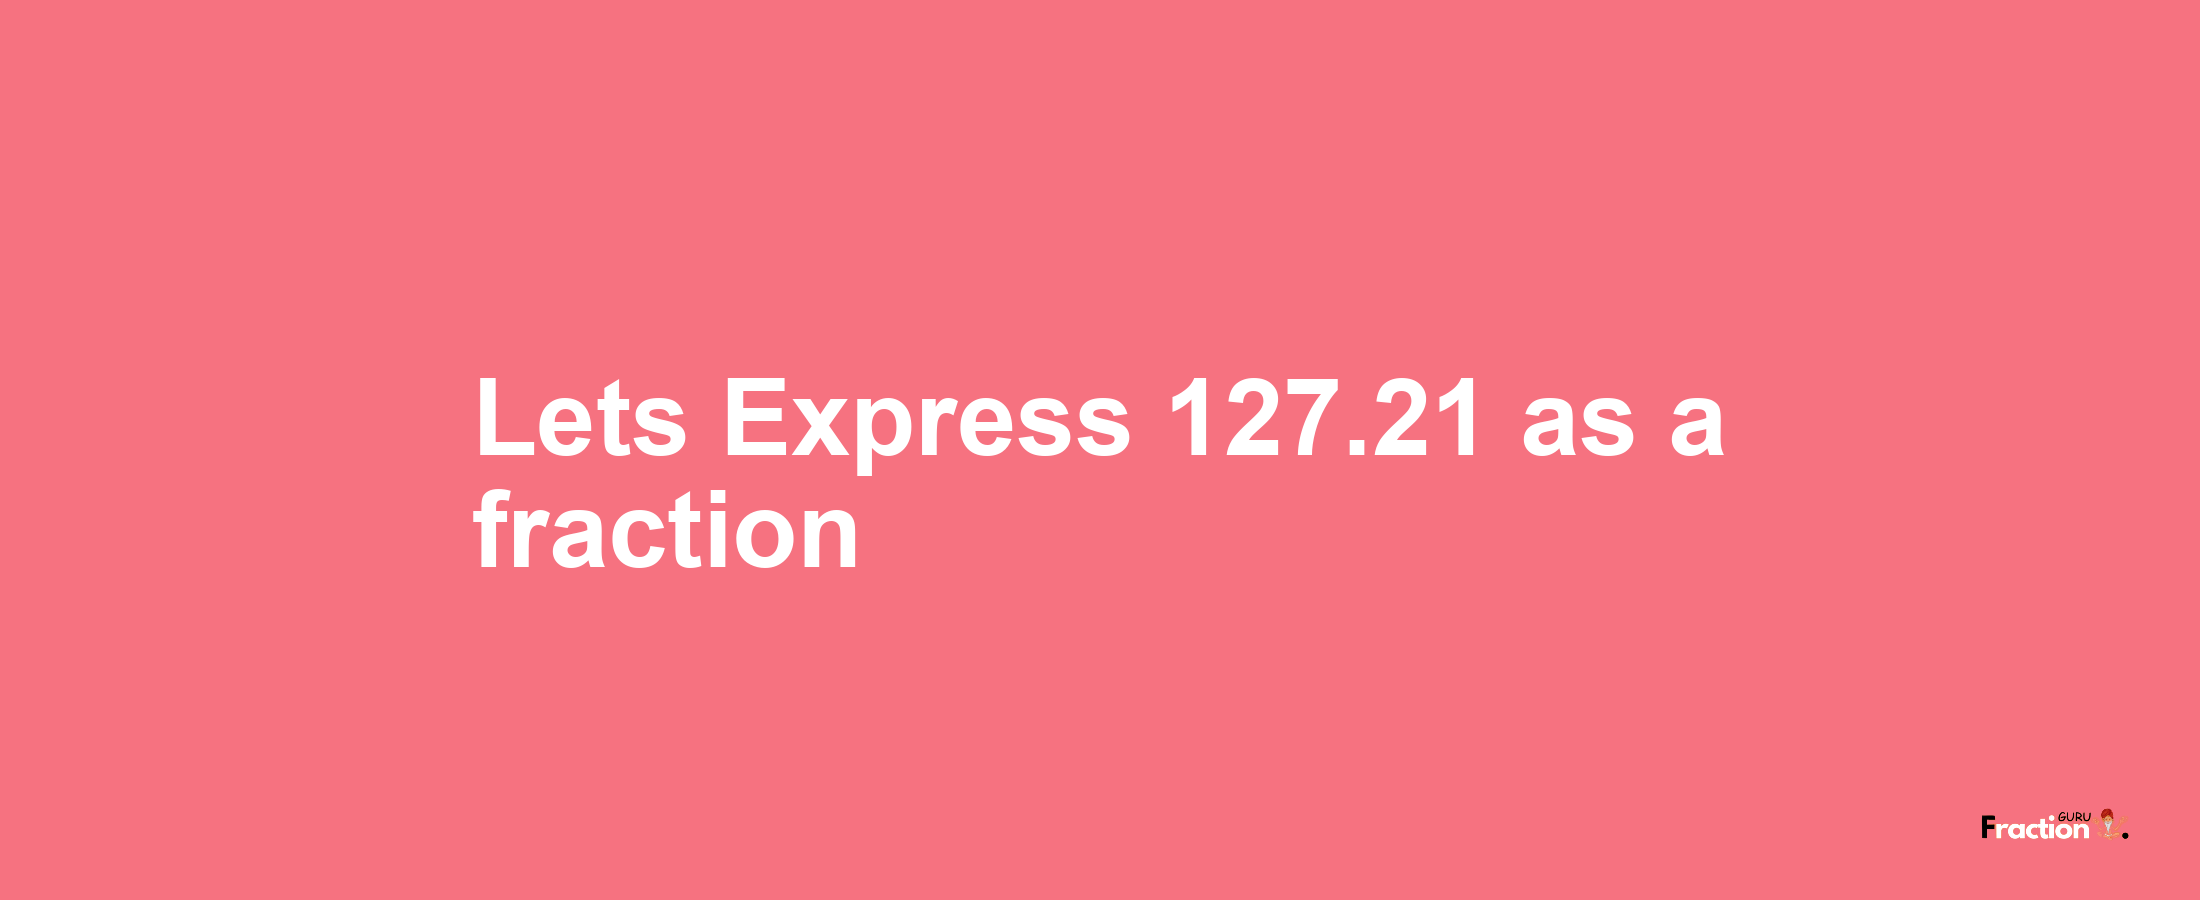 Lets Express 127.21 as afraction